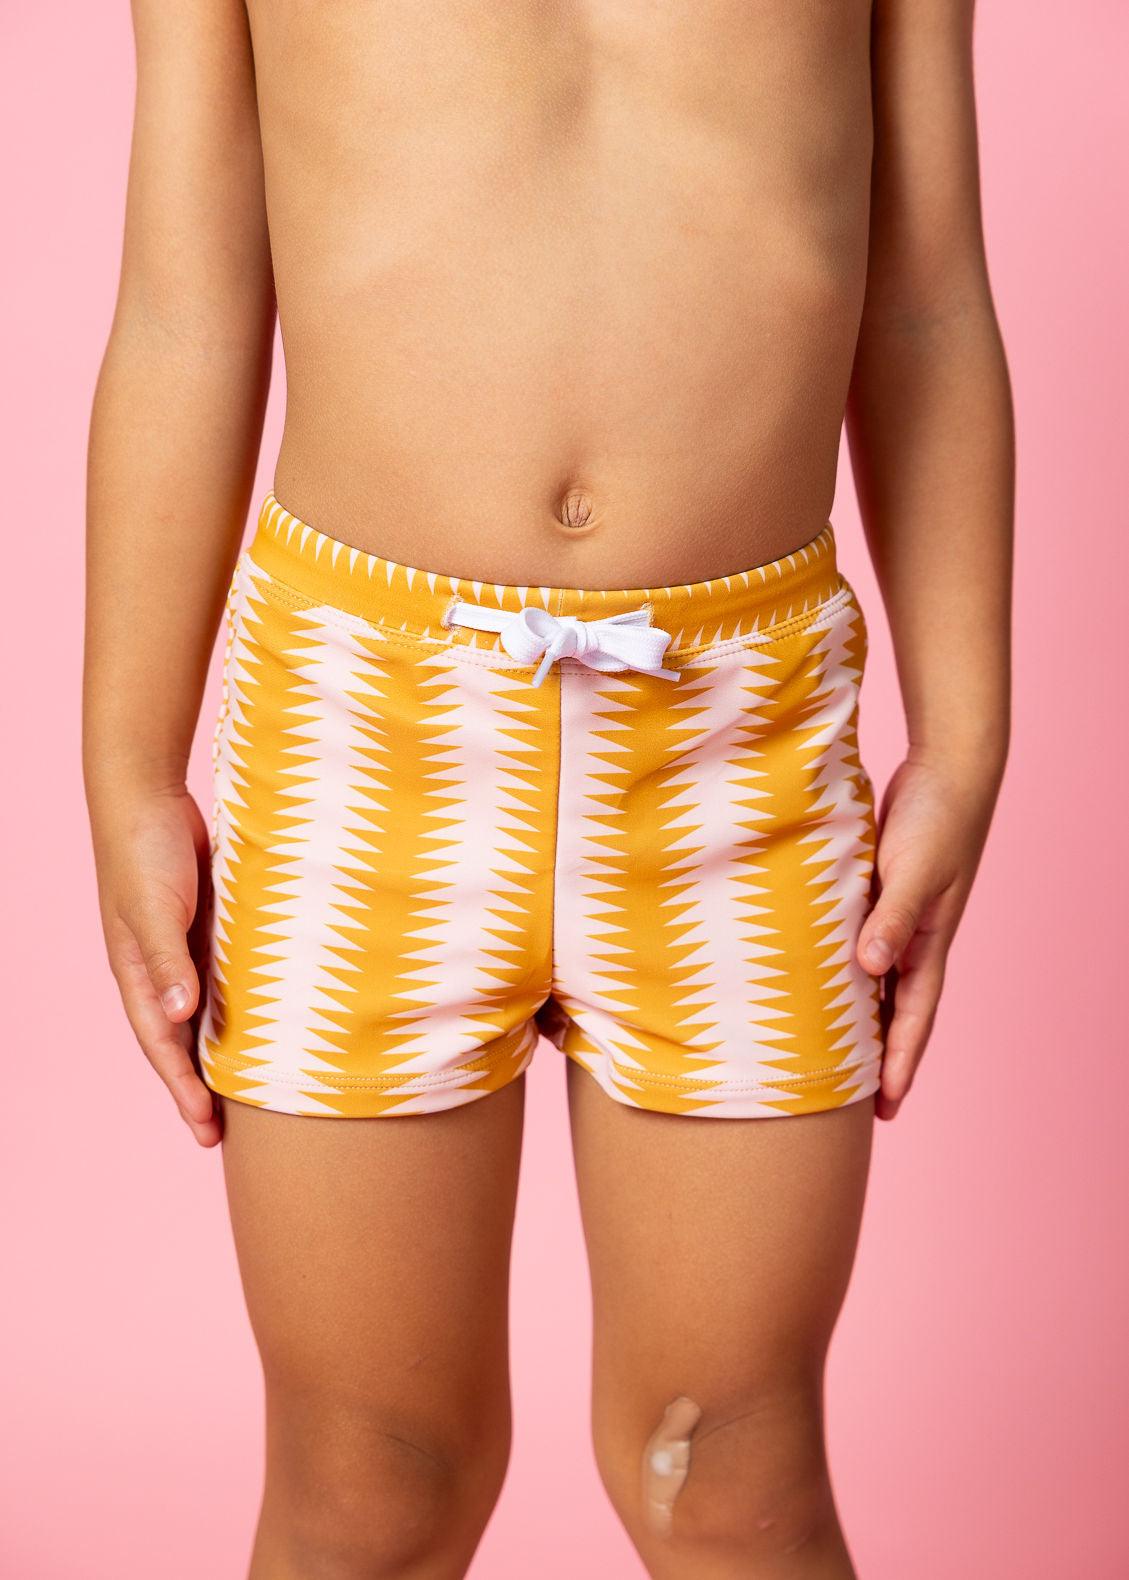 Boys Swimsuit - Shorts  - Vintage Triangles